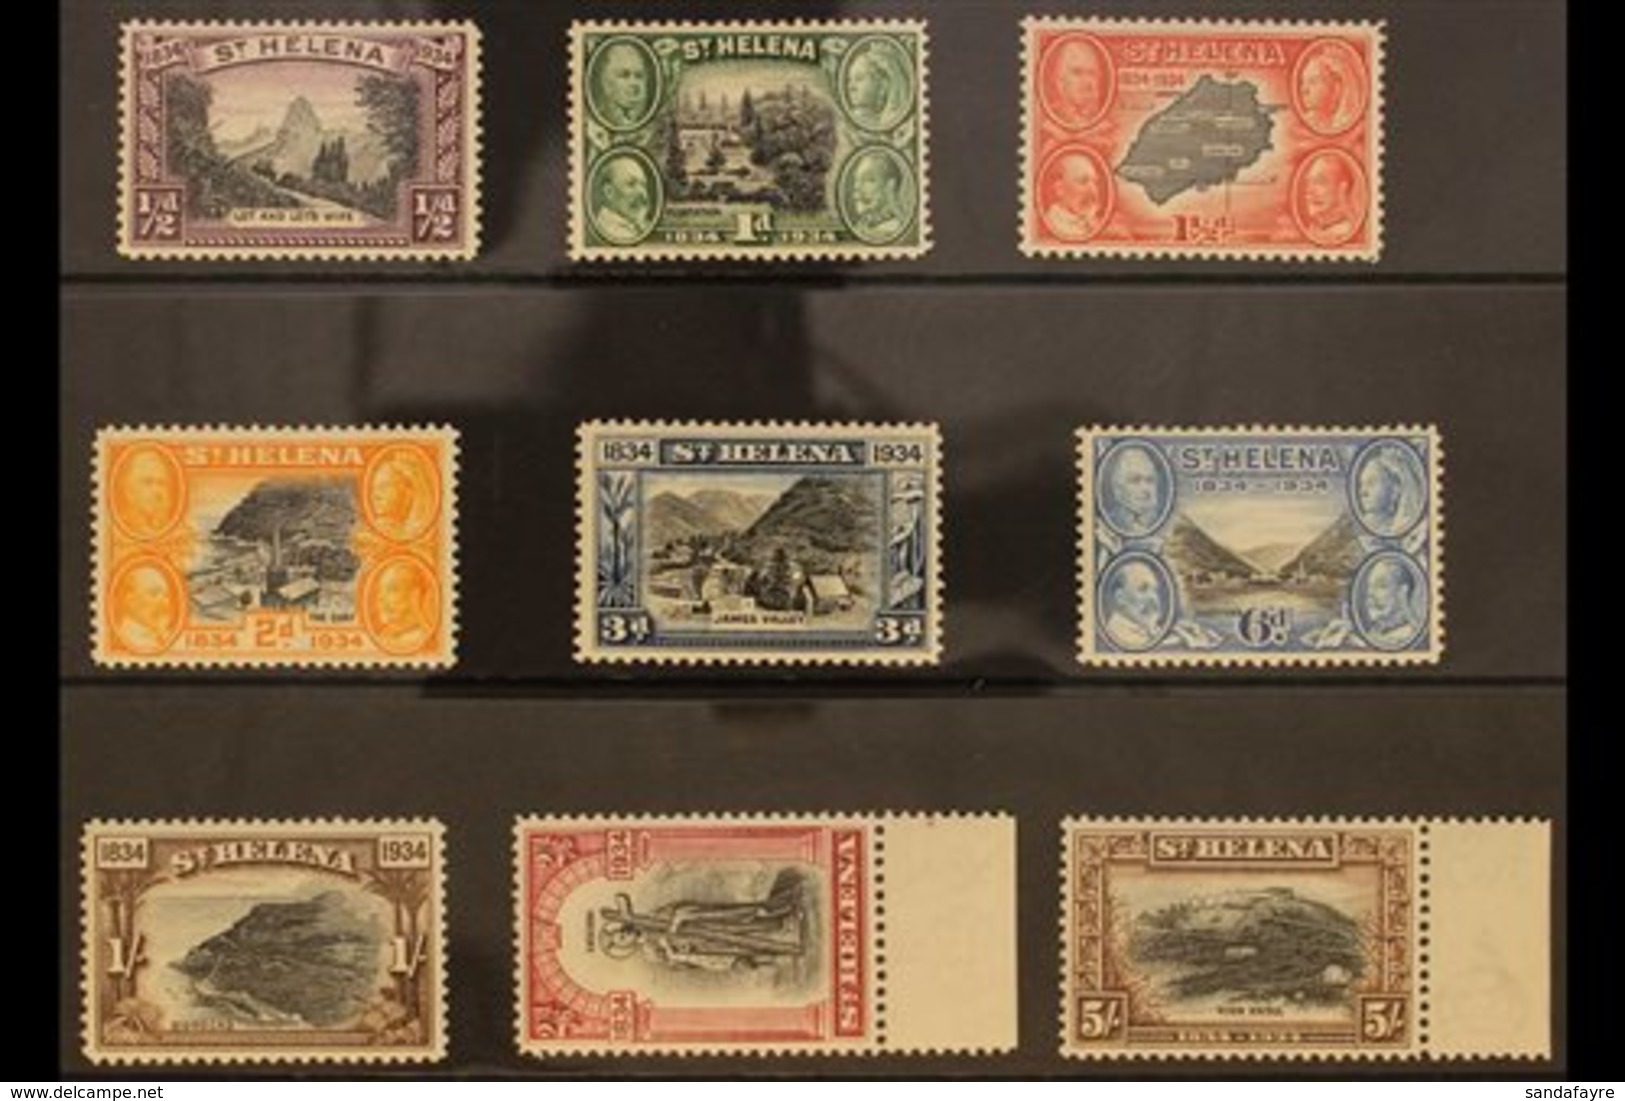 1934 Pictorial Defins, ½d To 5s Complete, SG 114/22, Never Hinged Mint And Scarce Thus (9 Stamps). For More Images, Plea - Saint Helena Island